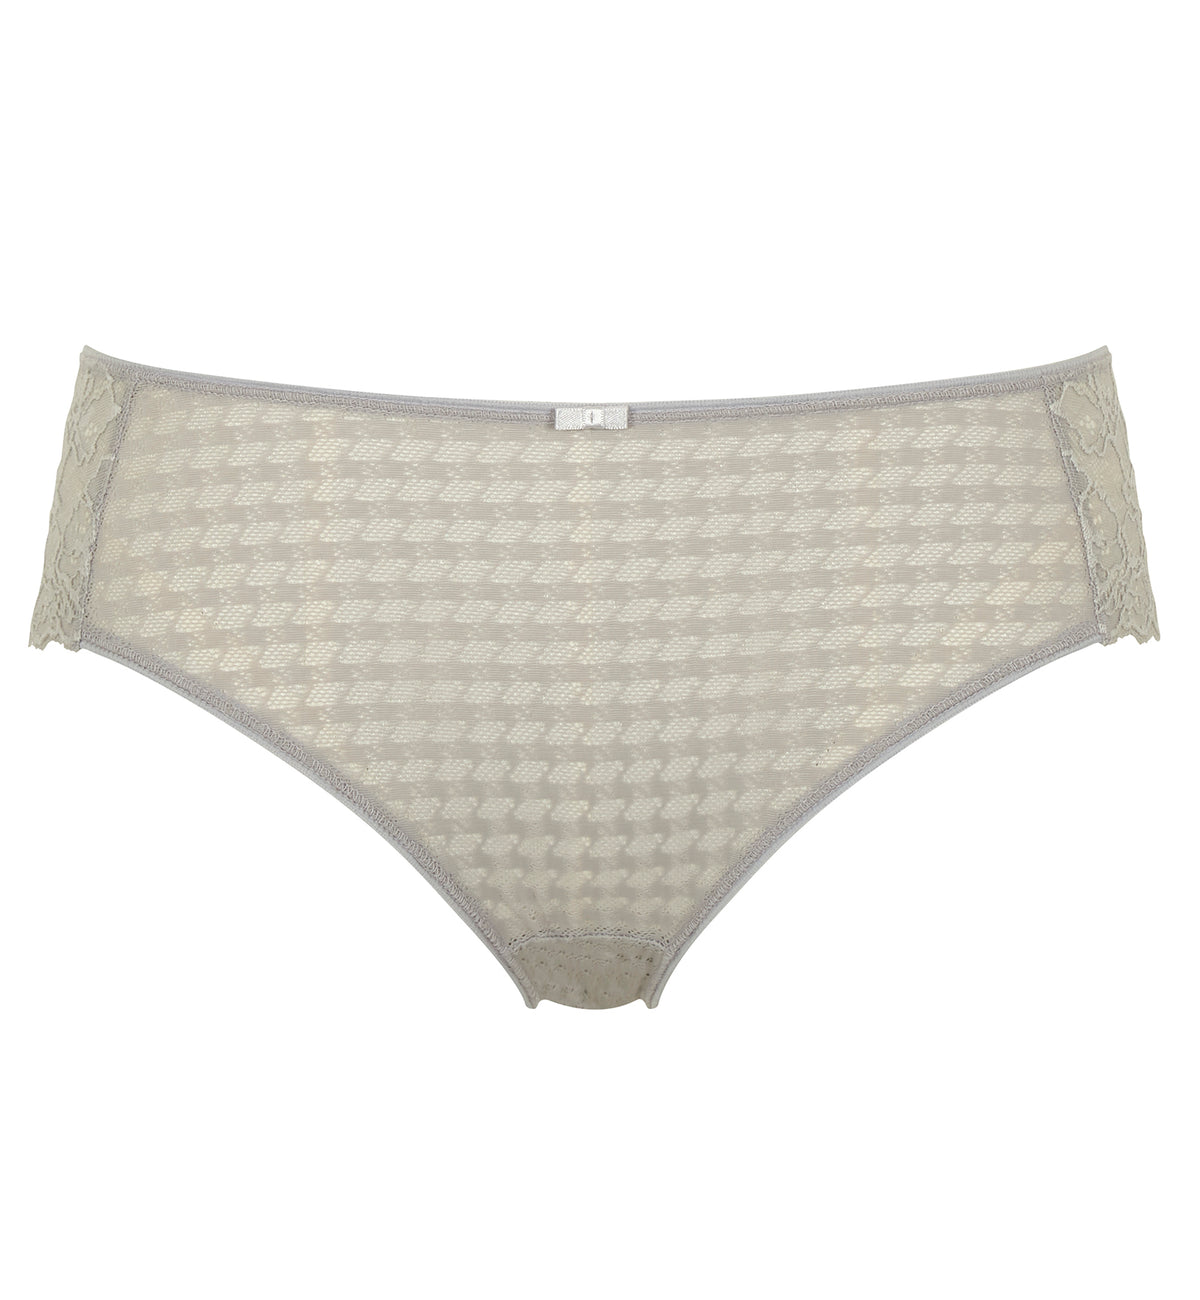 Panache Envy Matching Brief (7282),Small,Silver - Silver,Small